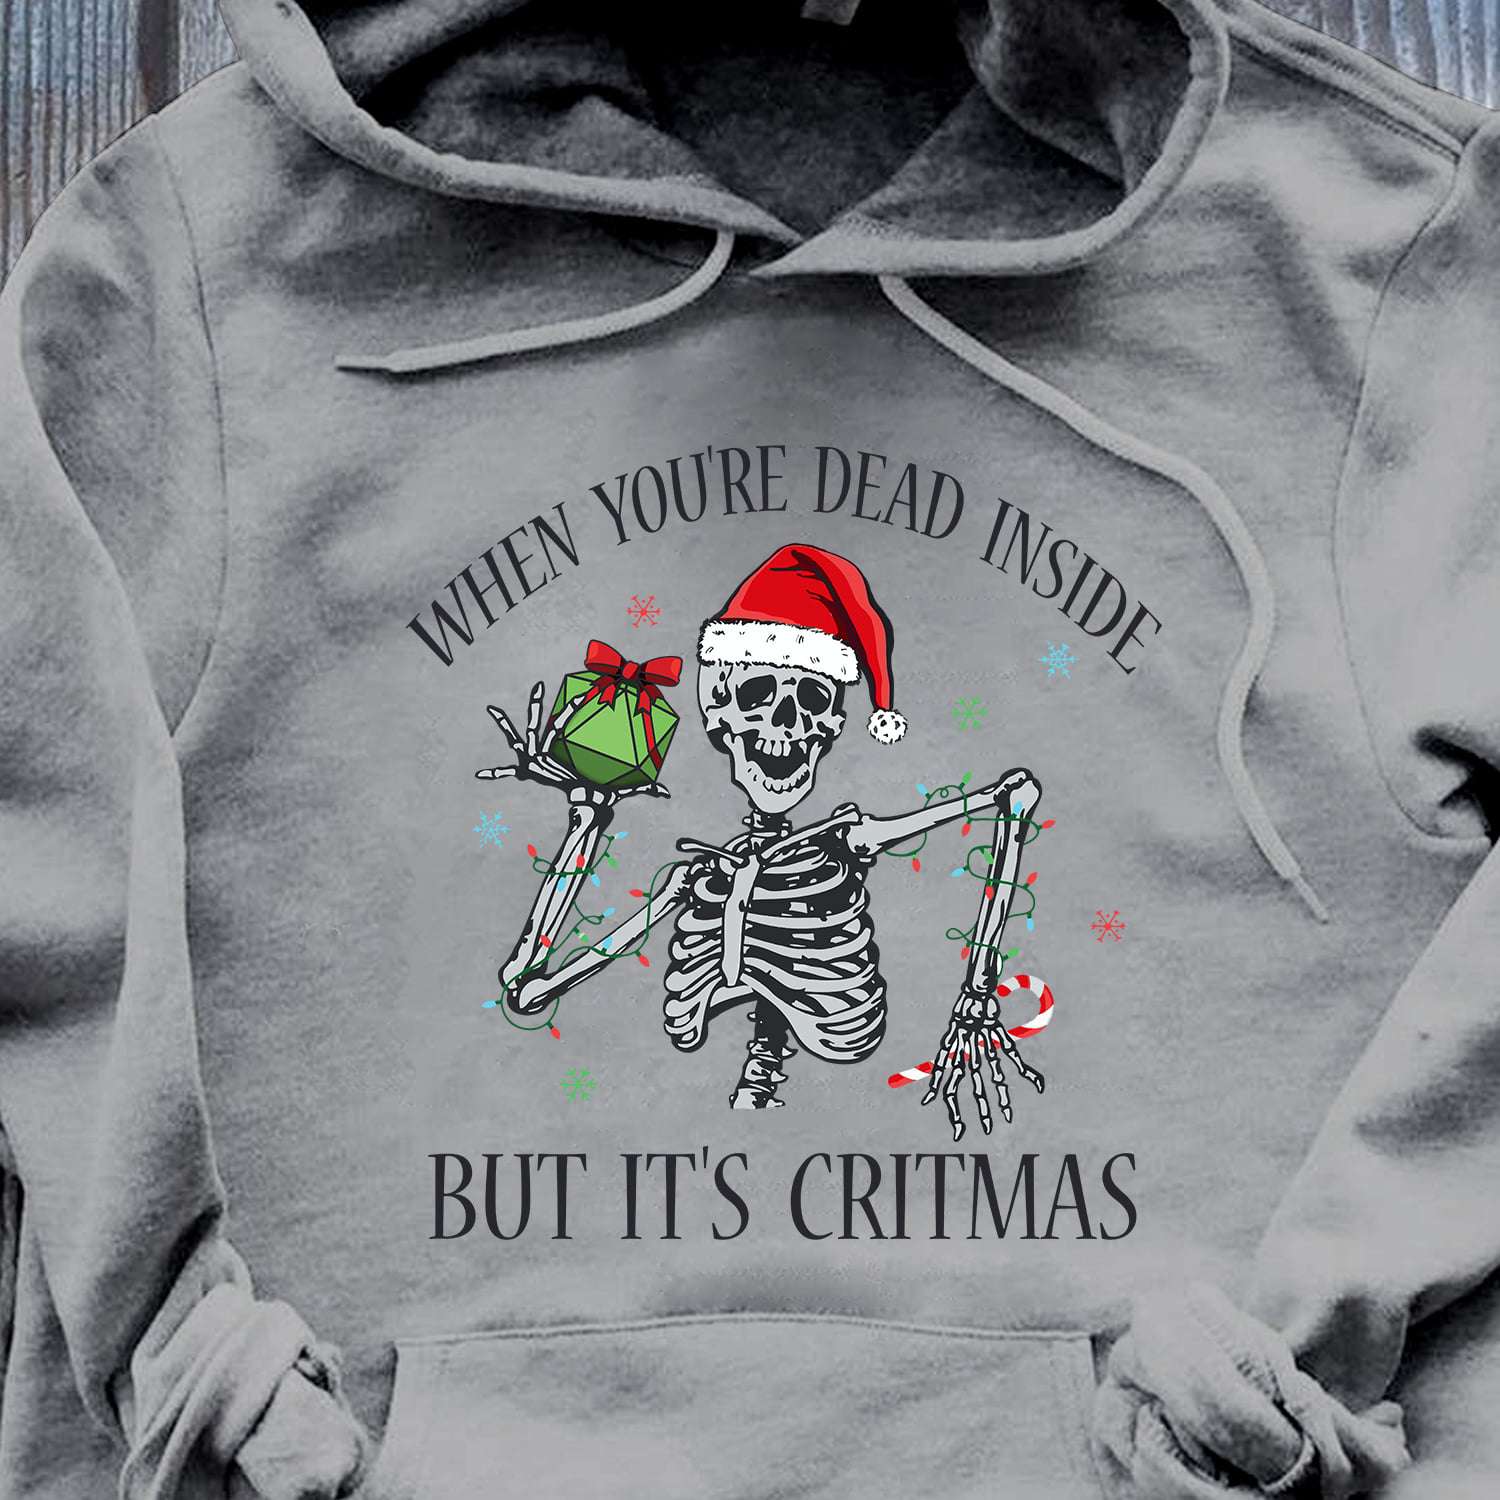 When you're dead inside but it's critmas - Funny christmas skull, gift for Christmas day